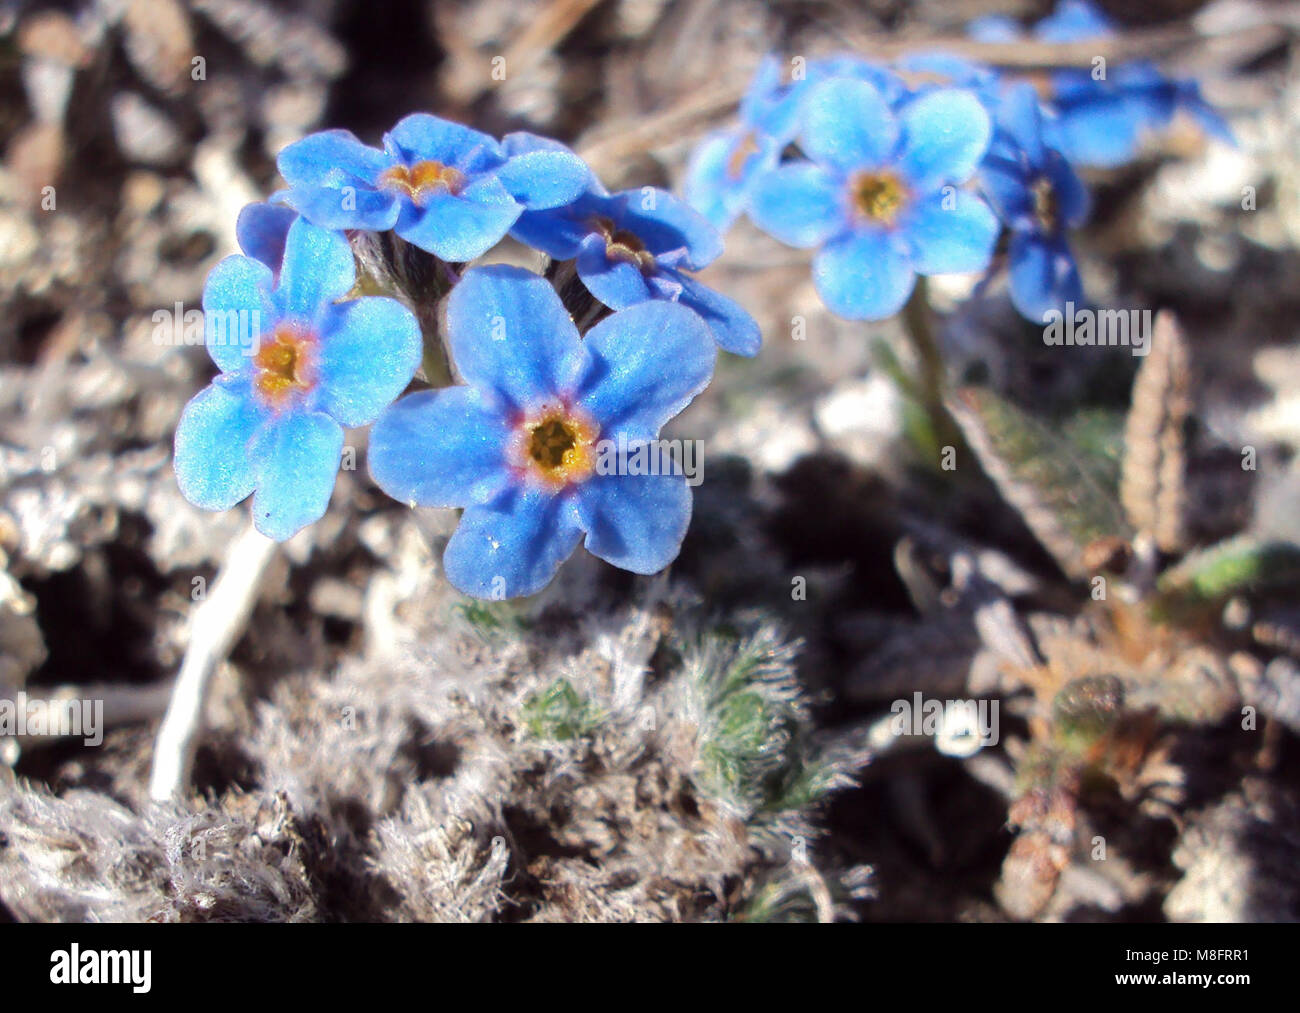 Arctic Alpine Forget-me-not   .Arctic Alpine Forget-me-not (Eritrichium nanum), is an early spring blooming flower. Remember to look down and look at the small details. The picture of the Forget-me-nots is larger than the actual Forget-me-nots I saw yesterday! Stock Photo